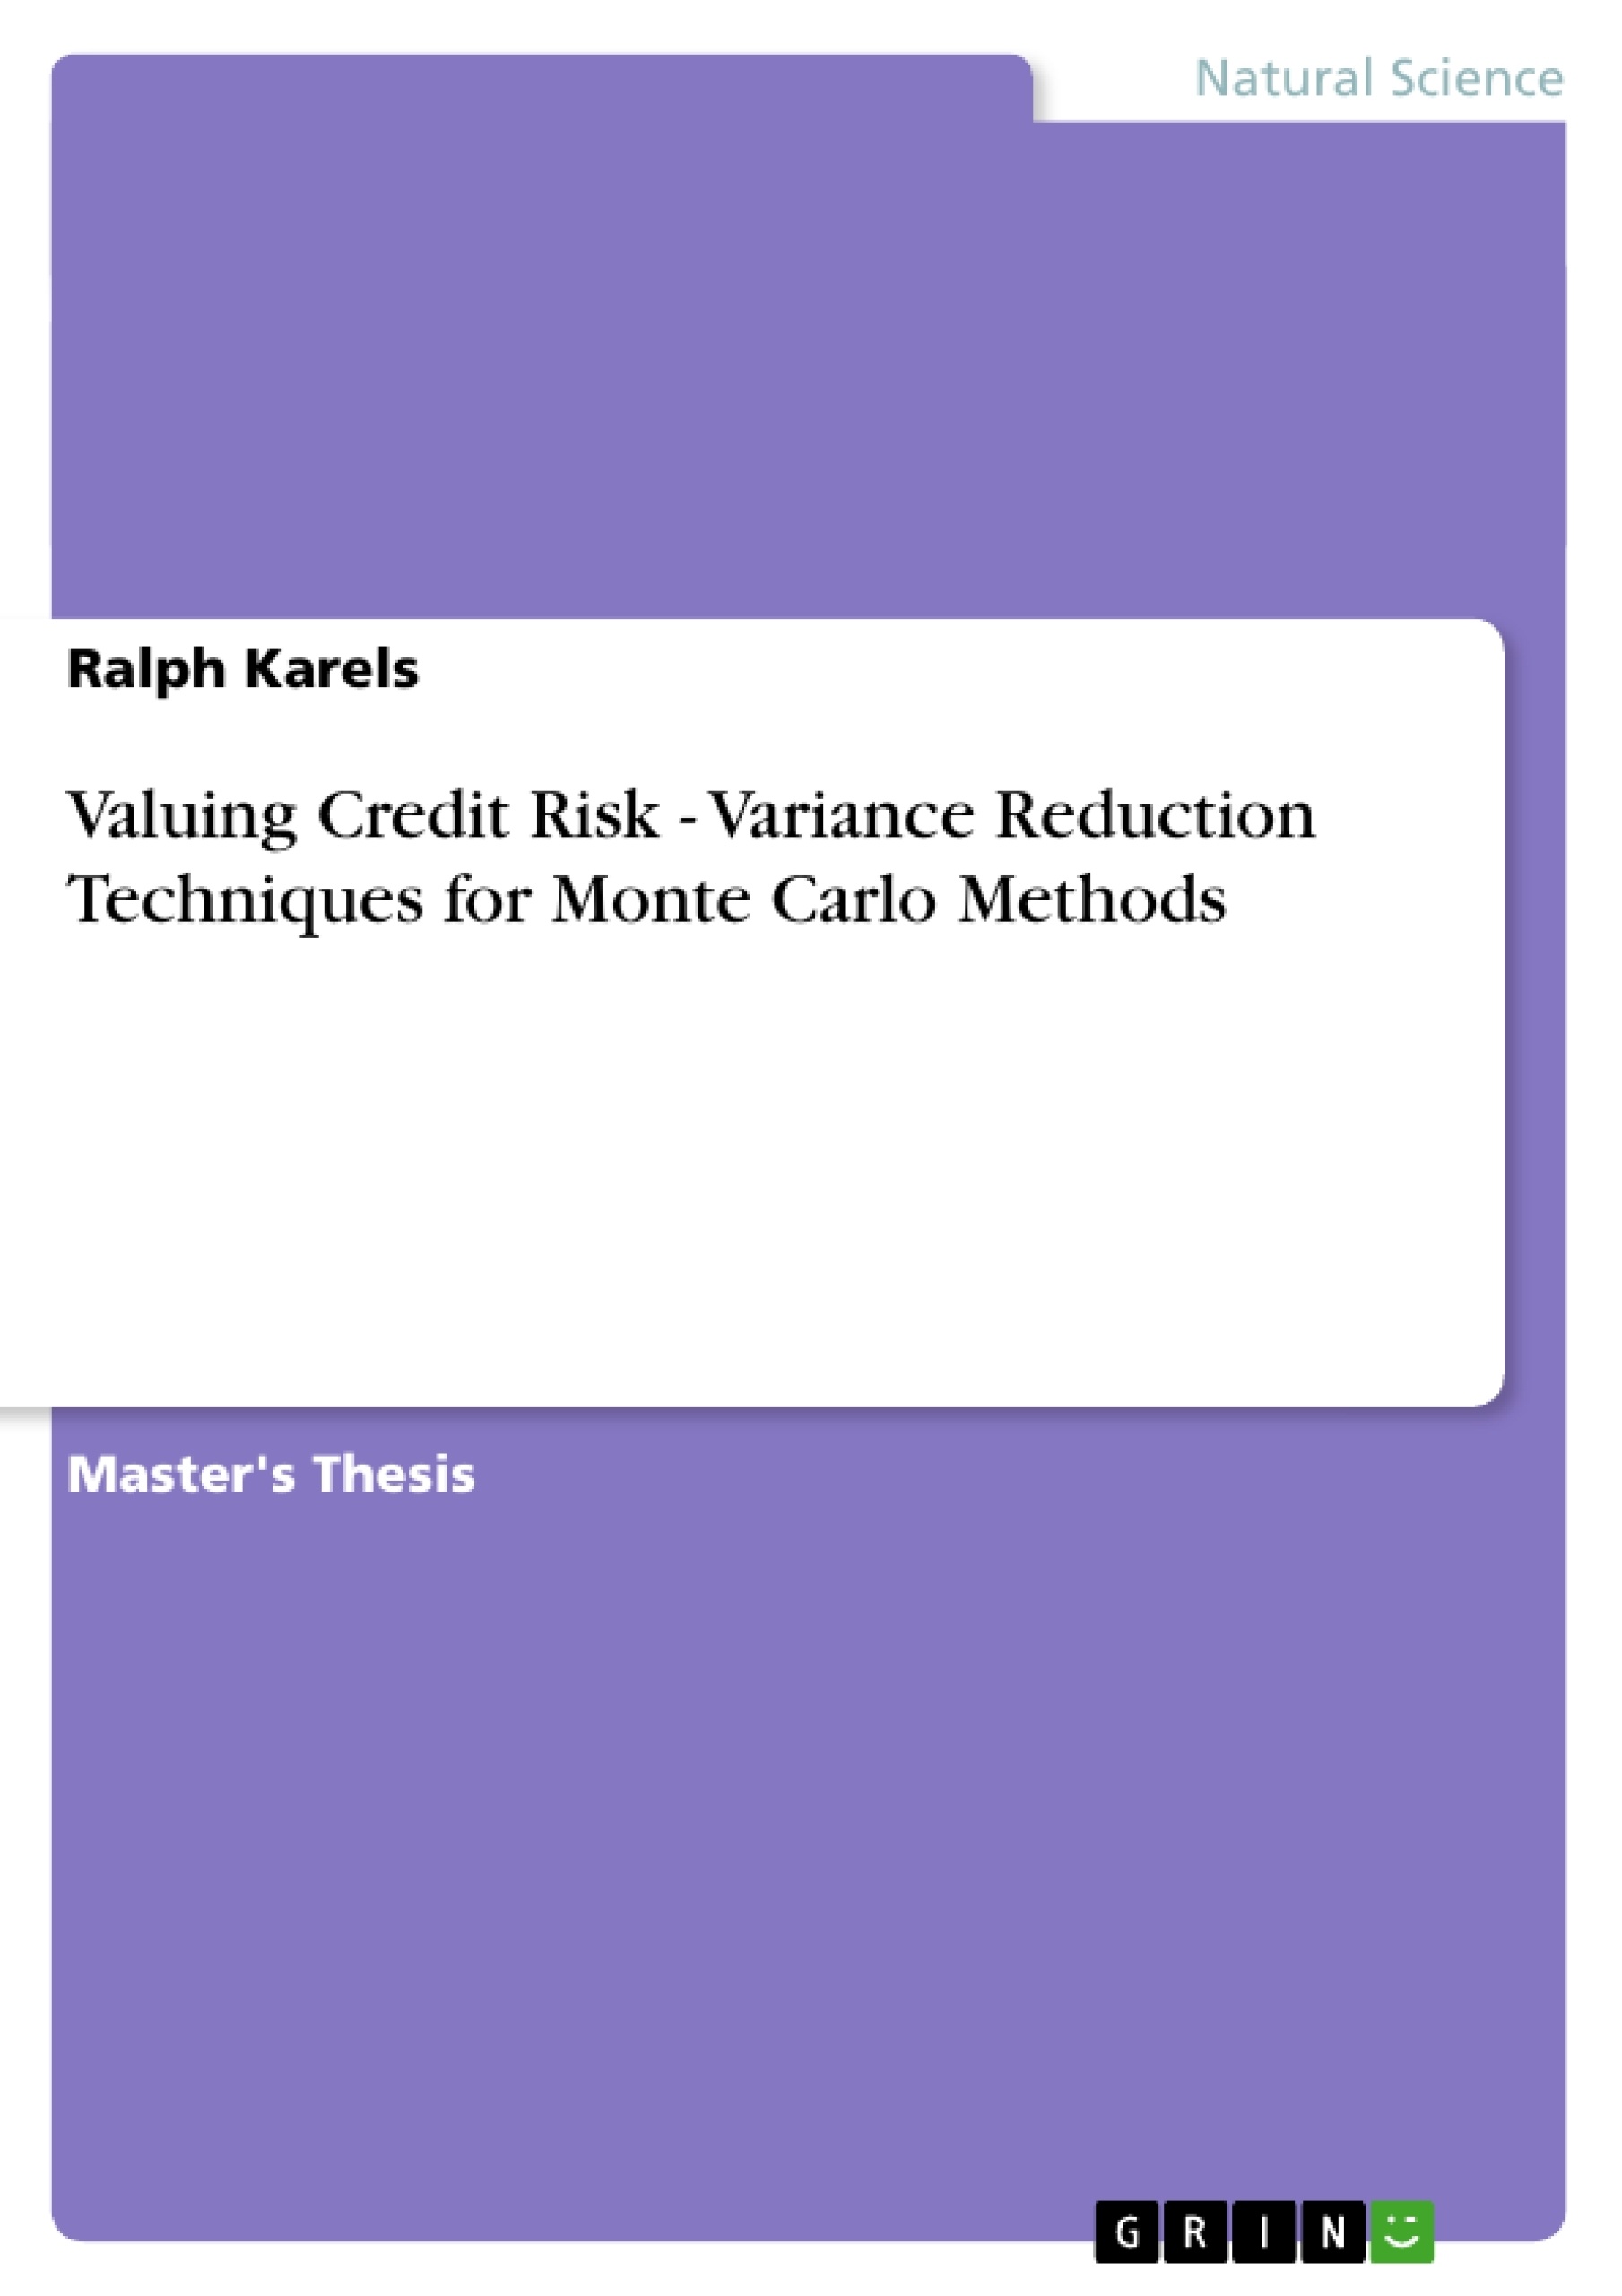 Titre: Valuing Credit Risk - Variance Reduction Techniques for Monte Carlo Methods